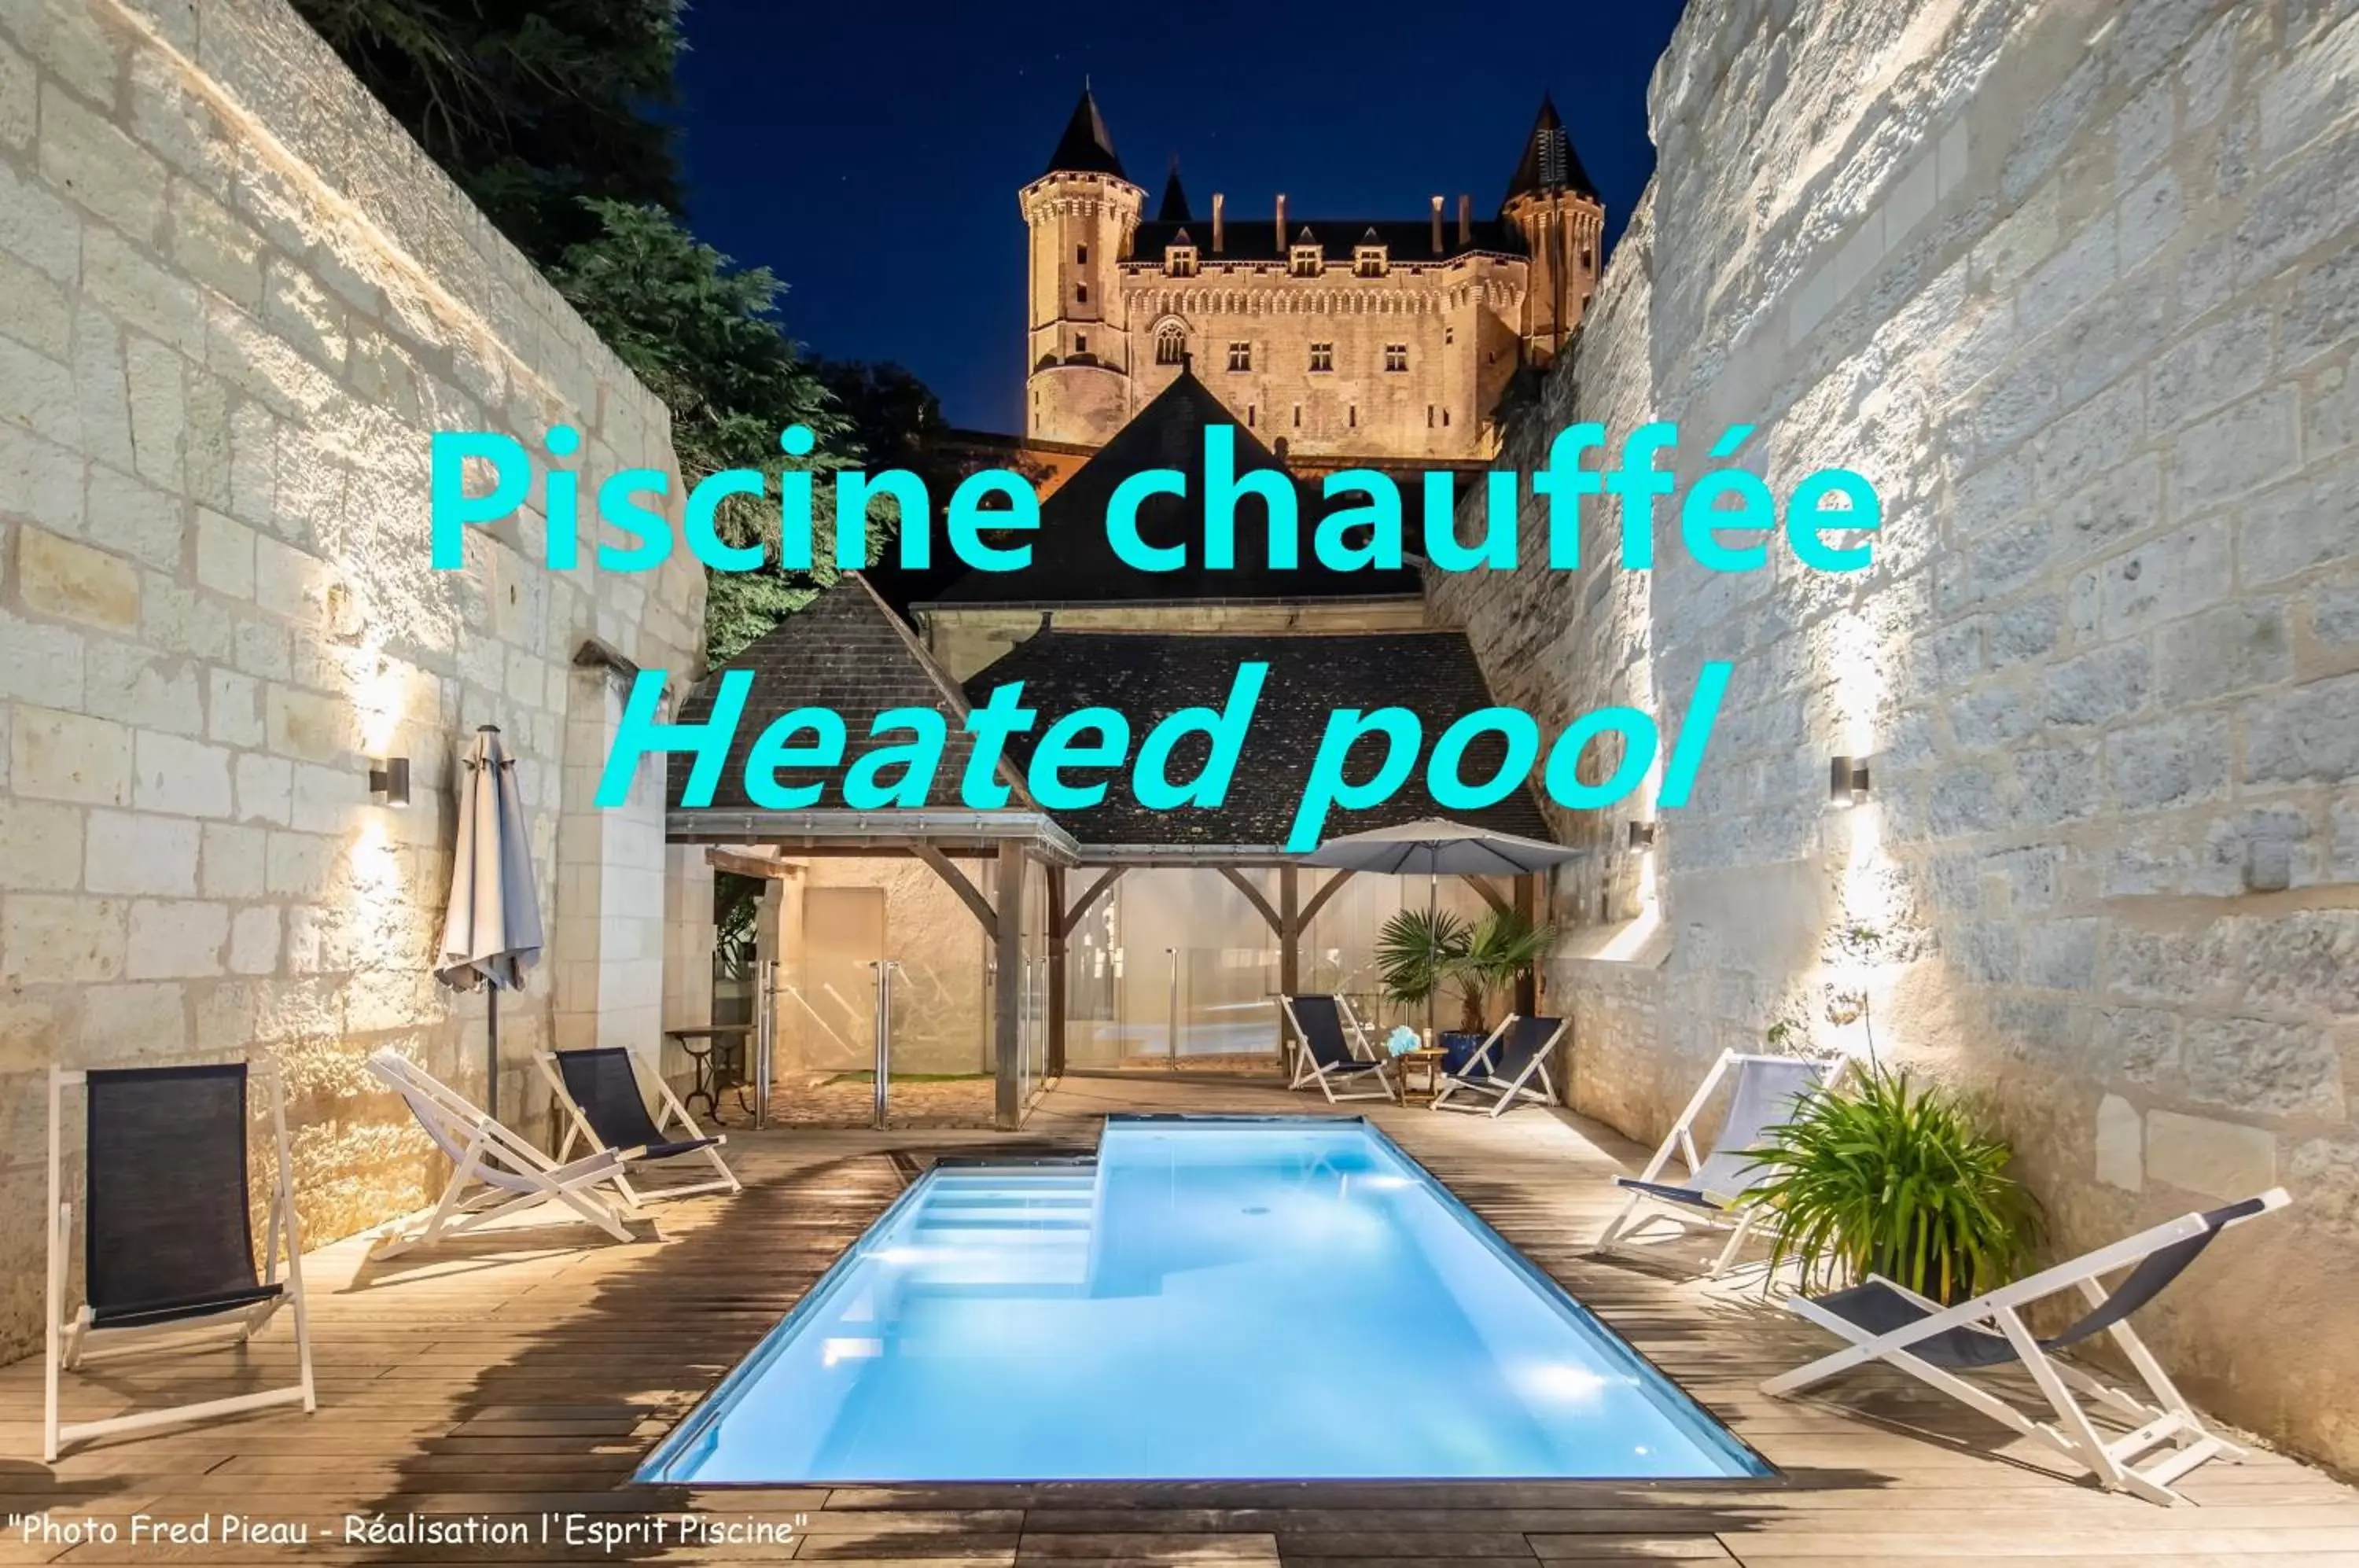 Swimming Pool in Hôtel Anne d'Anjou, The Originals Collection